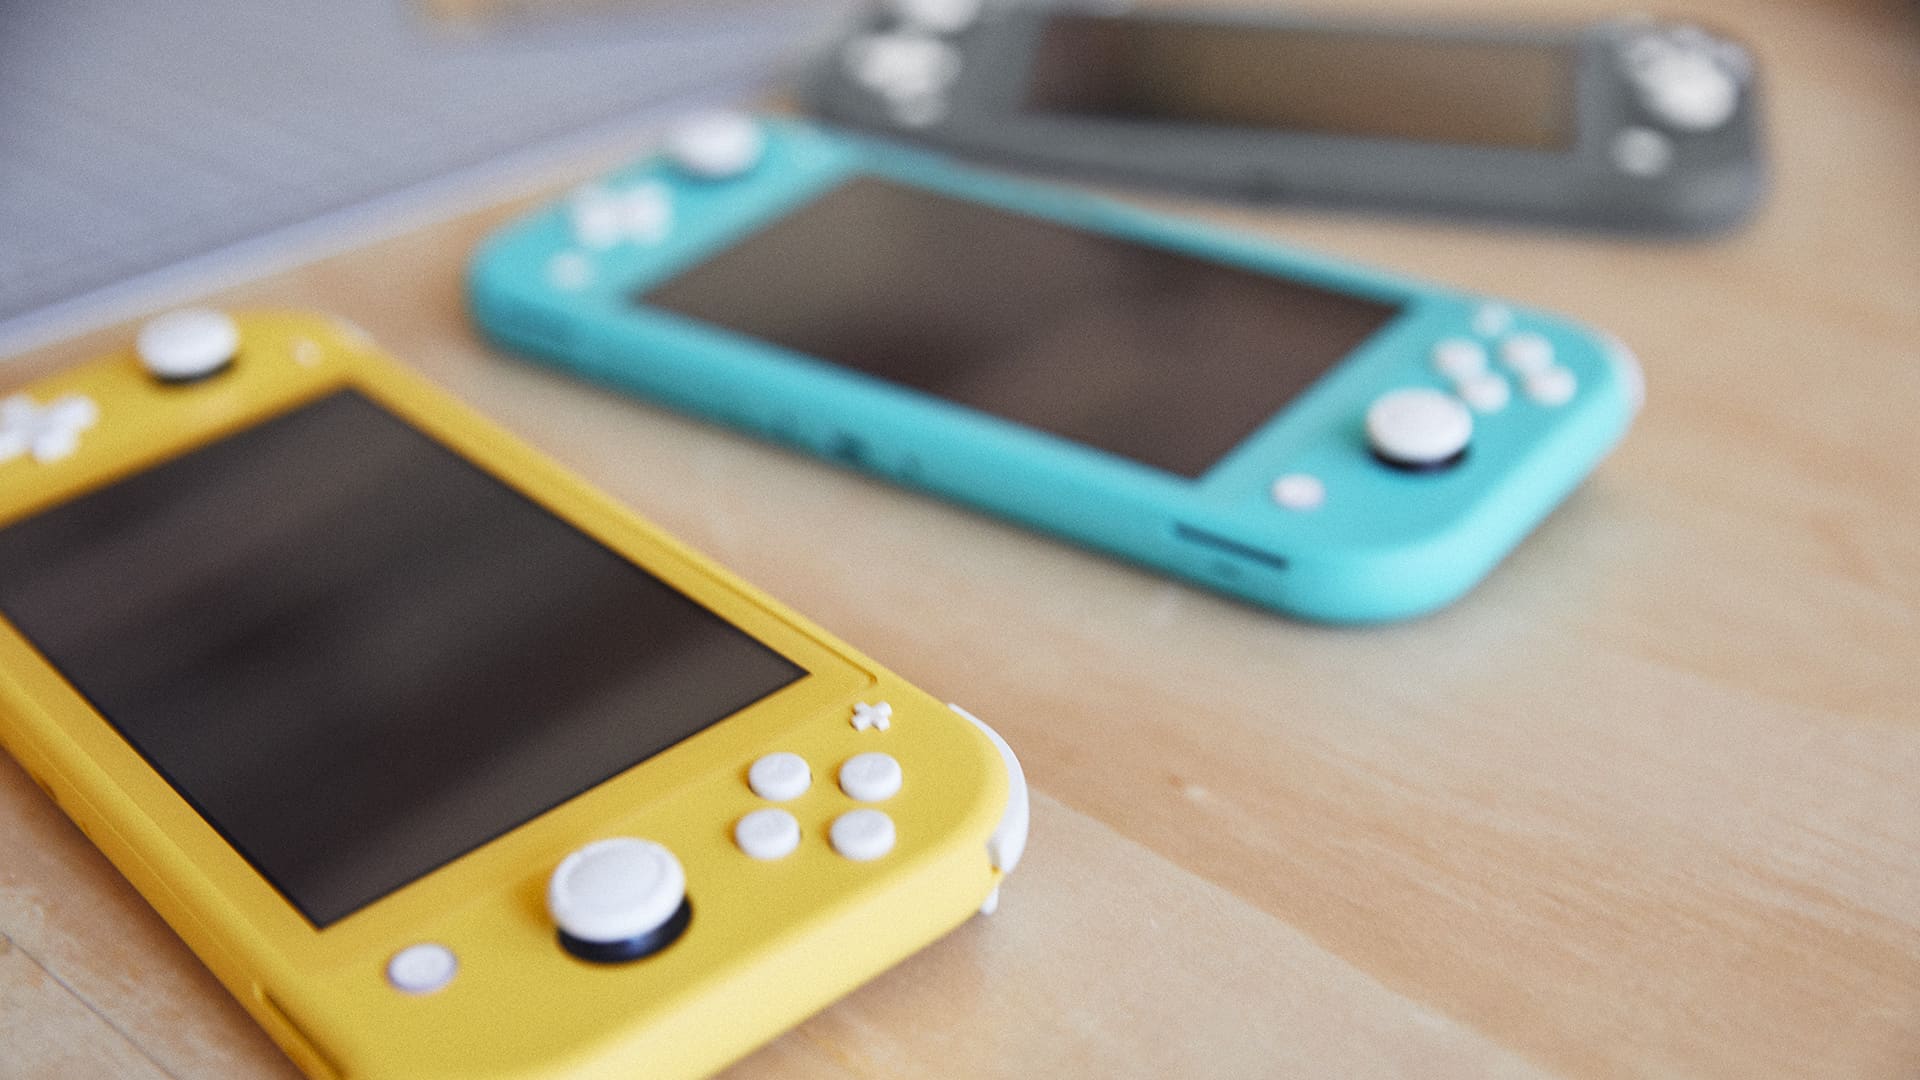 nintendo switch lite turquoise console